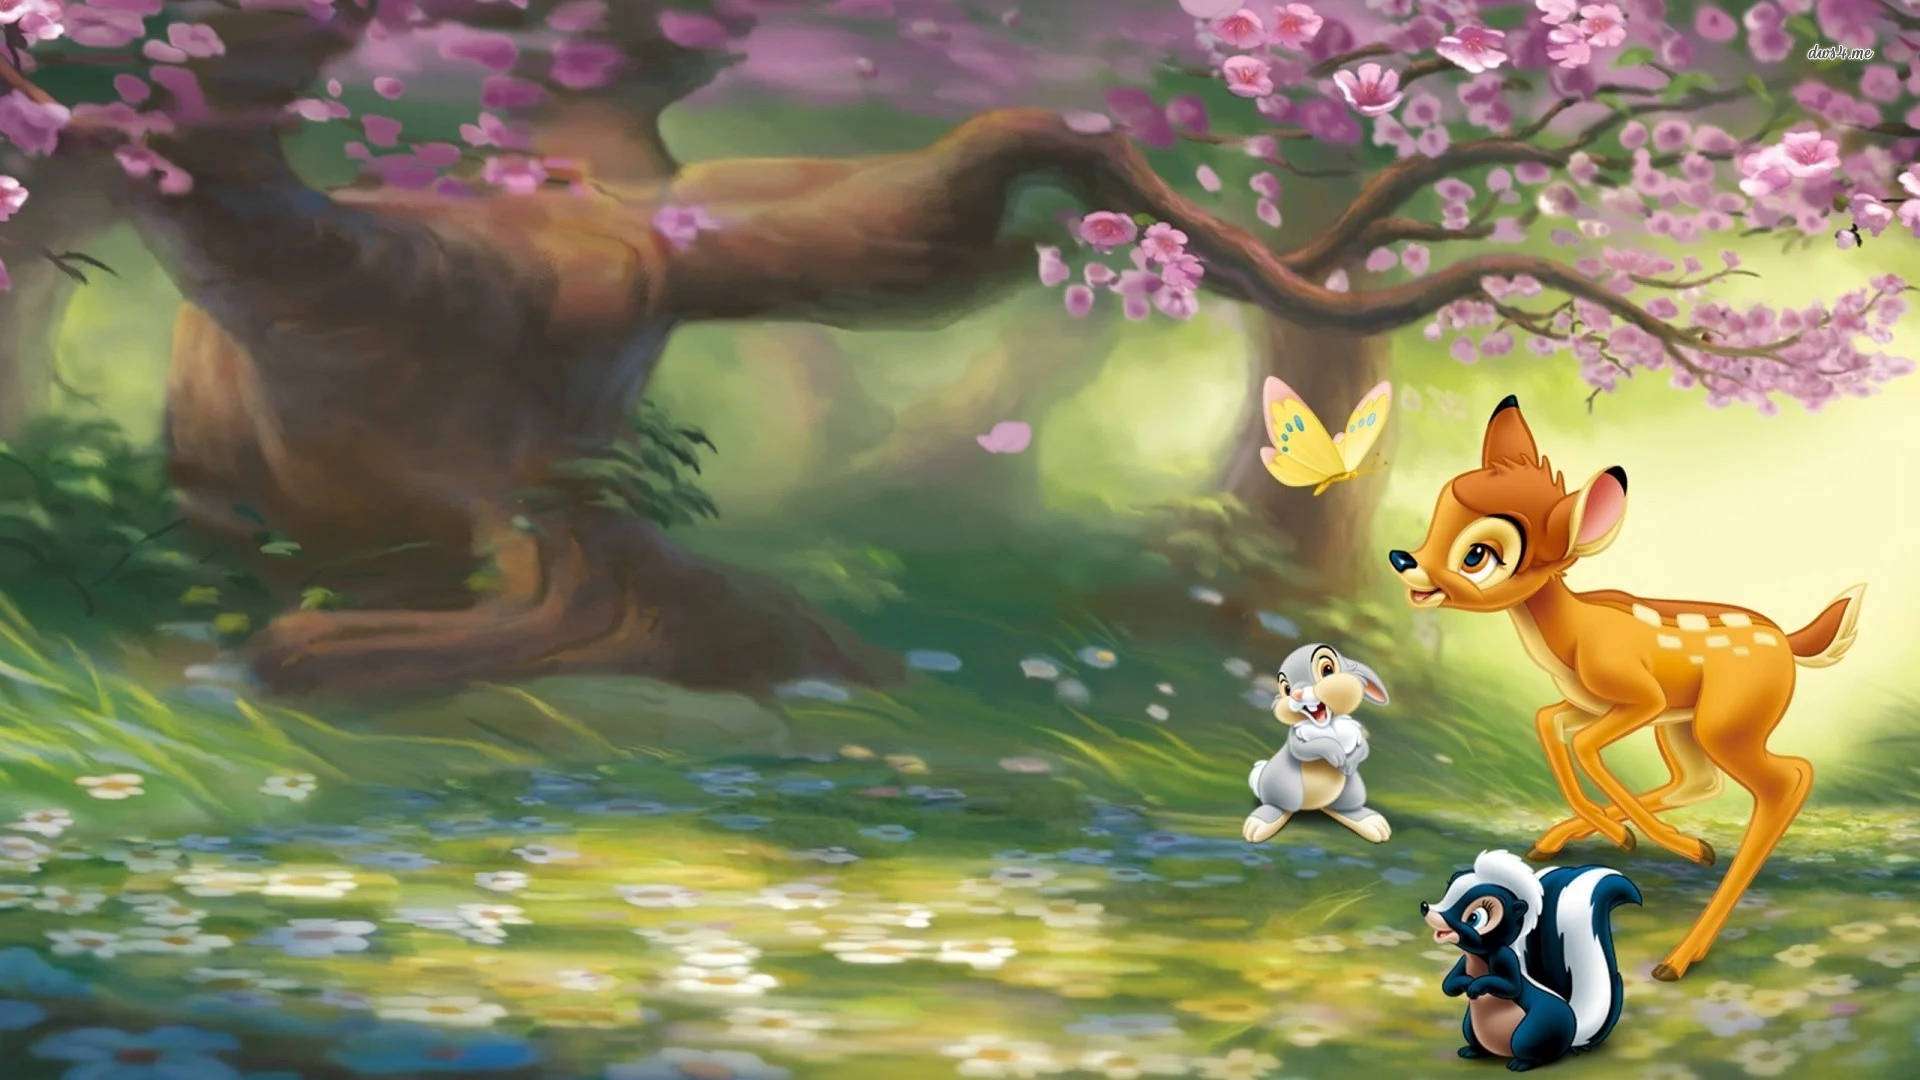 Bambi With Thumper And Flower Wallpaper